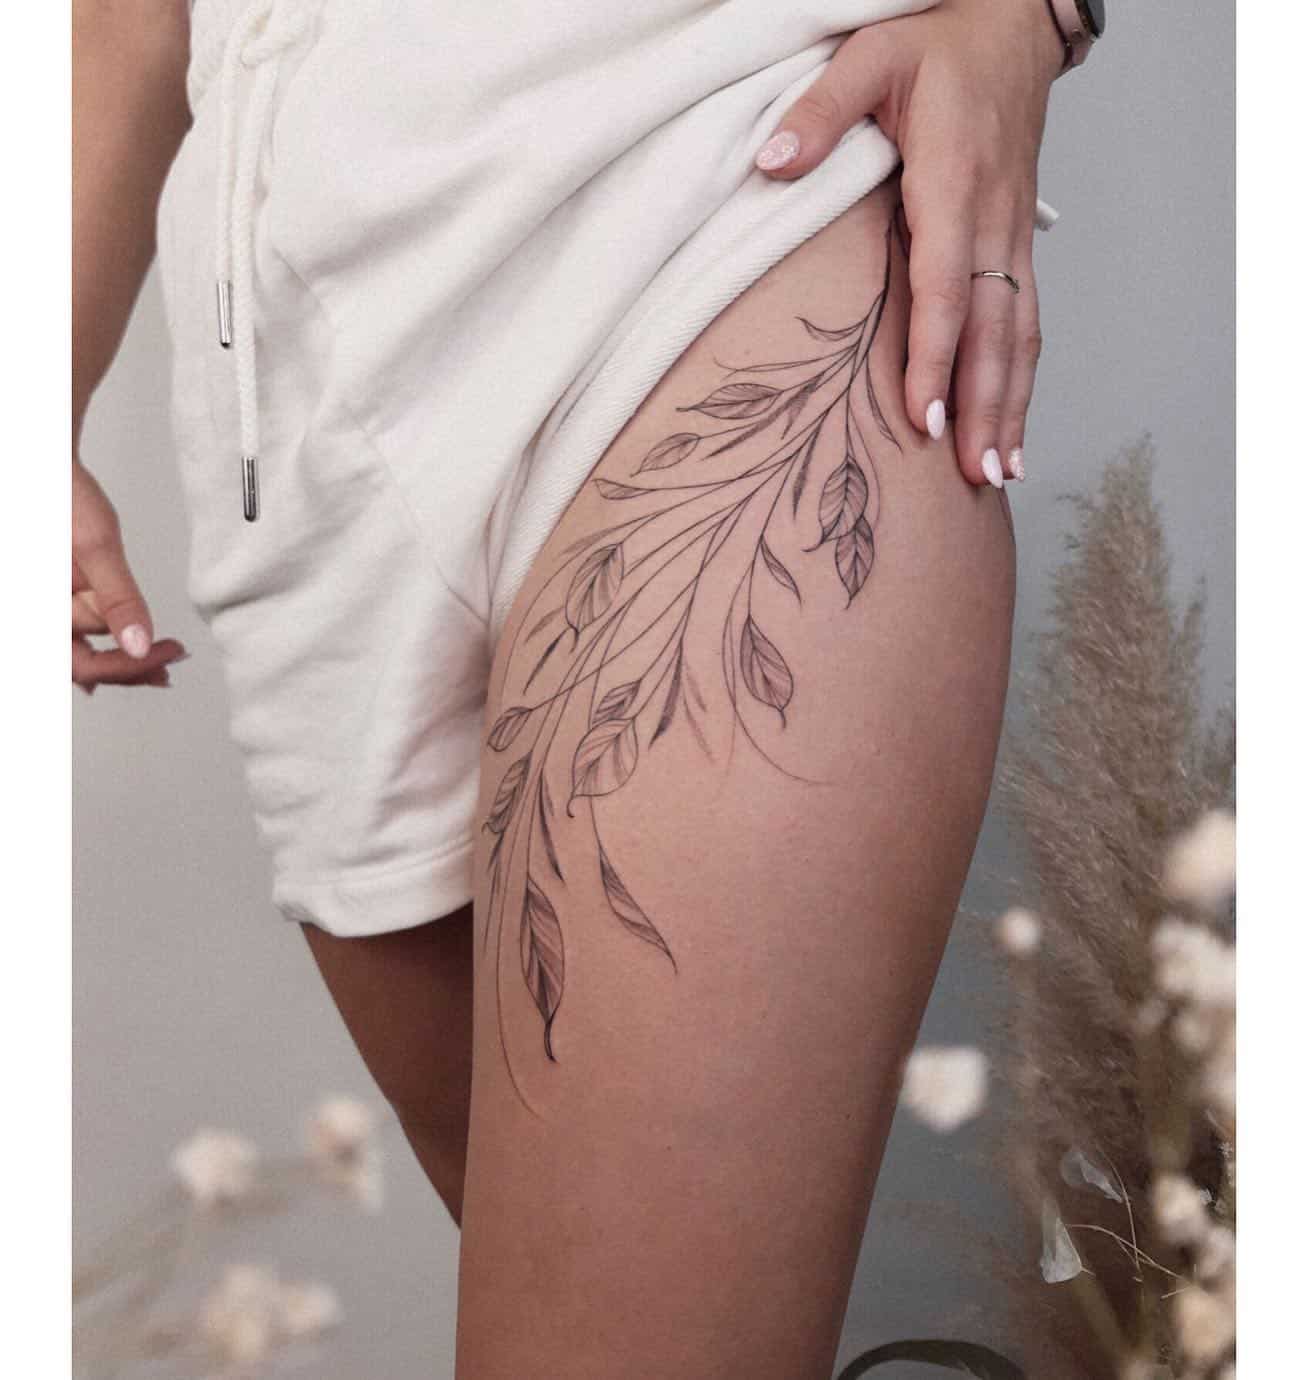 40 Awesome Thigh Tattoo Ideas for Men & Women in 2023